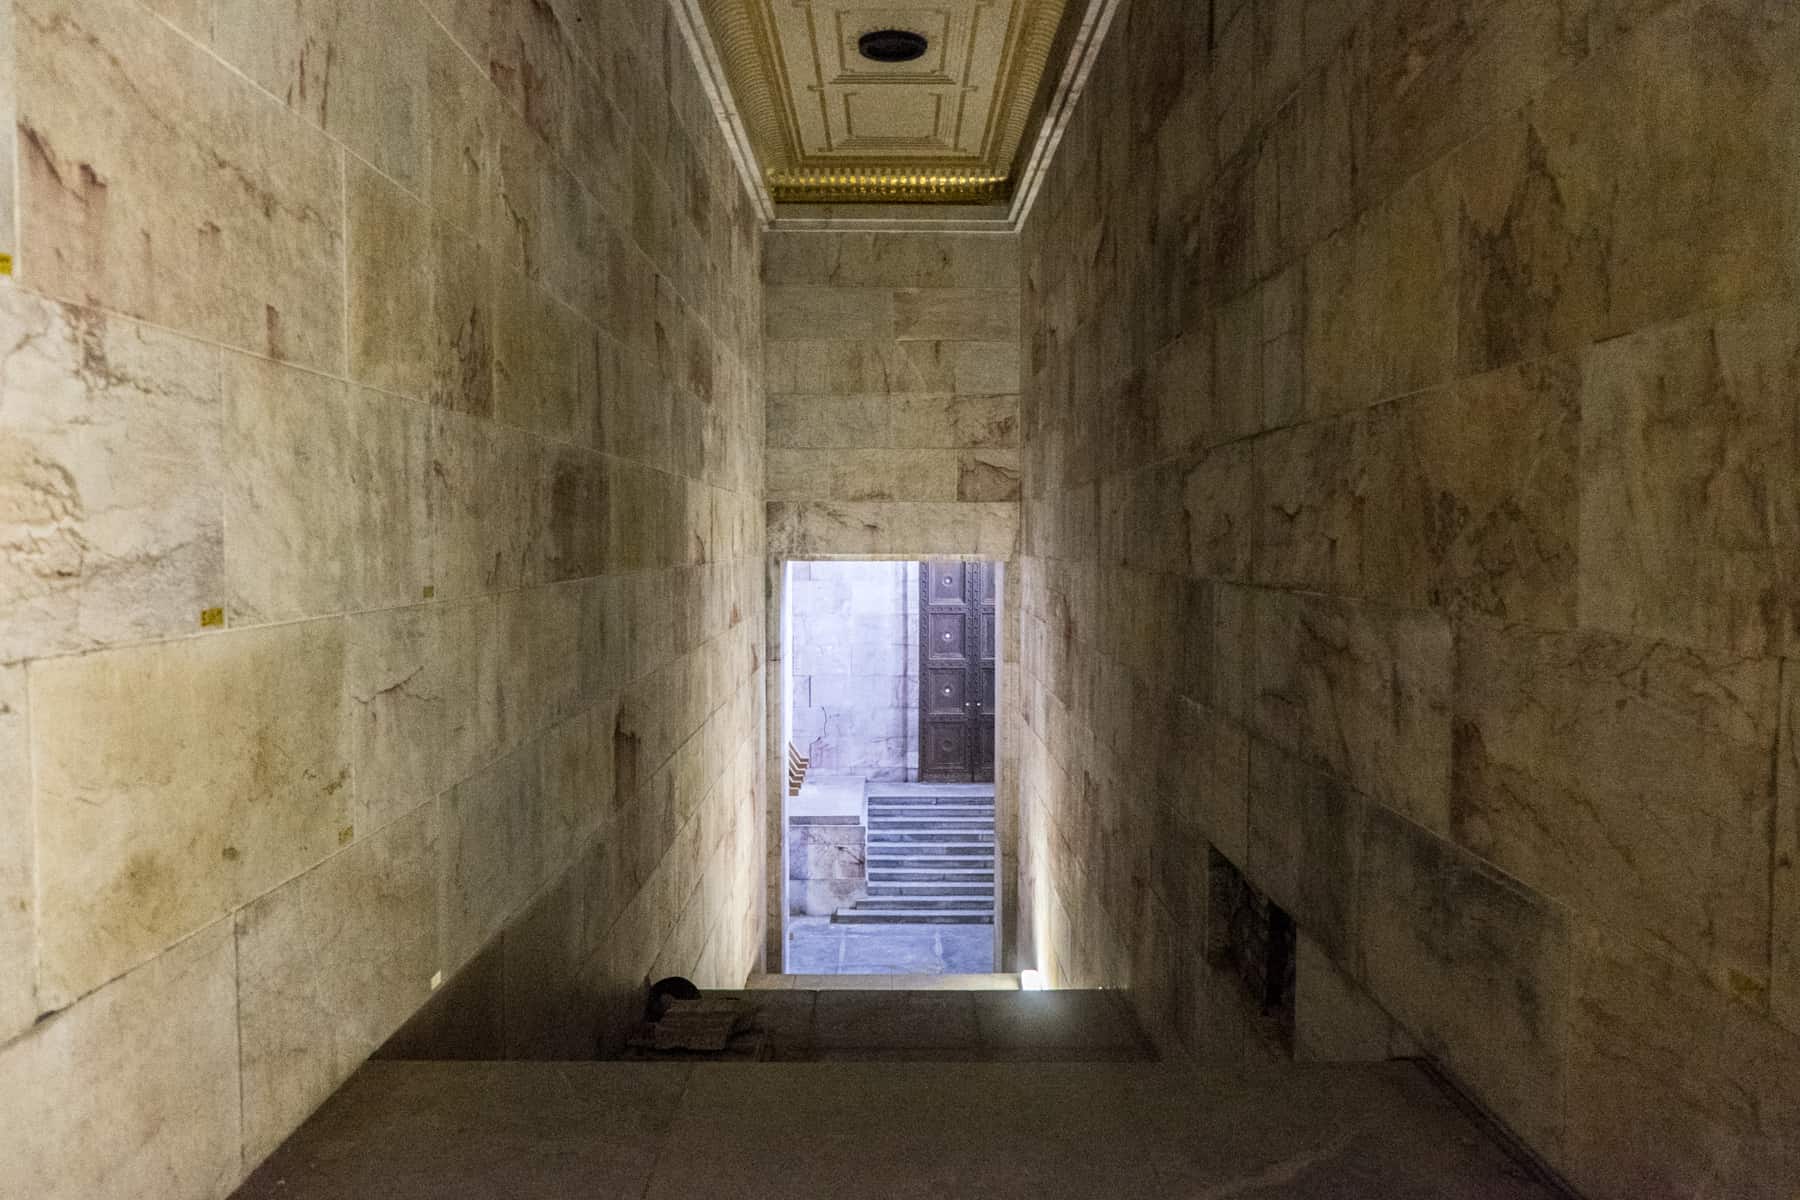 The long, wide and tall marble walled corridors Inside Zeppelin Field Zeppelinfeld Nazi Rally Grounds in Nuremberg